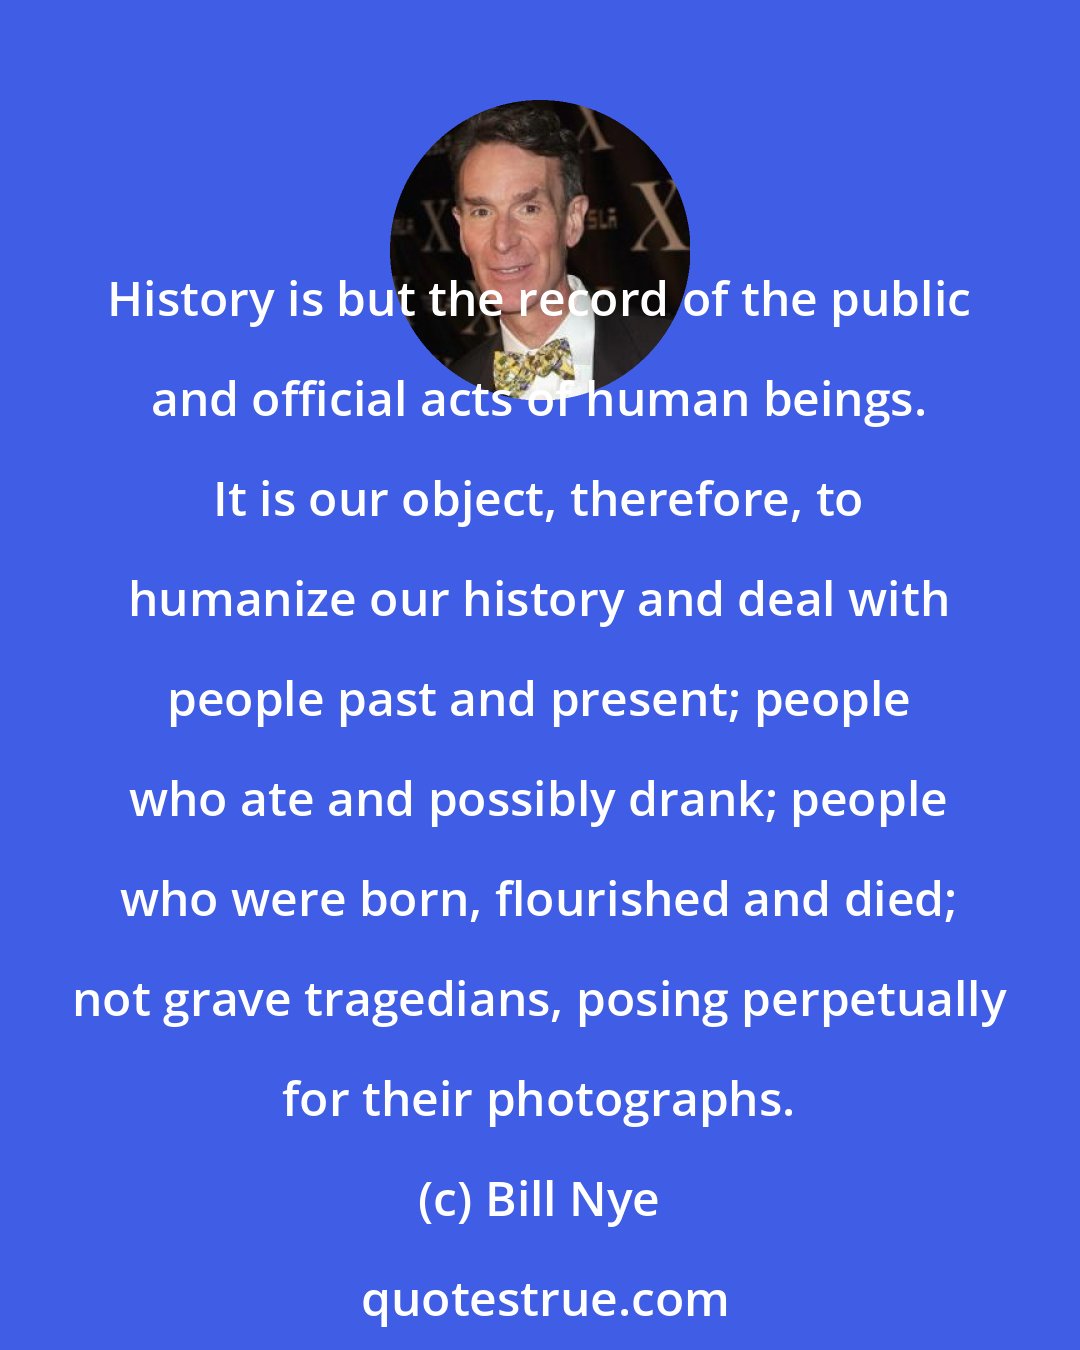 Bill Nye: History is but the record of the public and official acts of human beings. It is our object, therefore, to humanize our history and deal with people past and present; people who ate and possibly drank; people who were born, flourished and died; not grave tragedians, posing perpetually for their photographs.